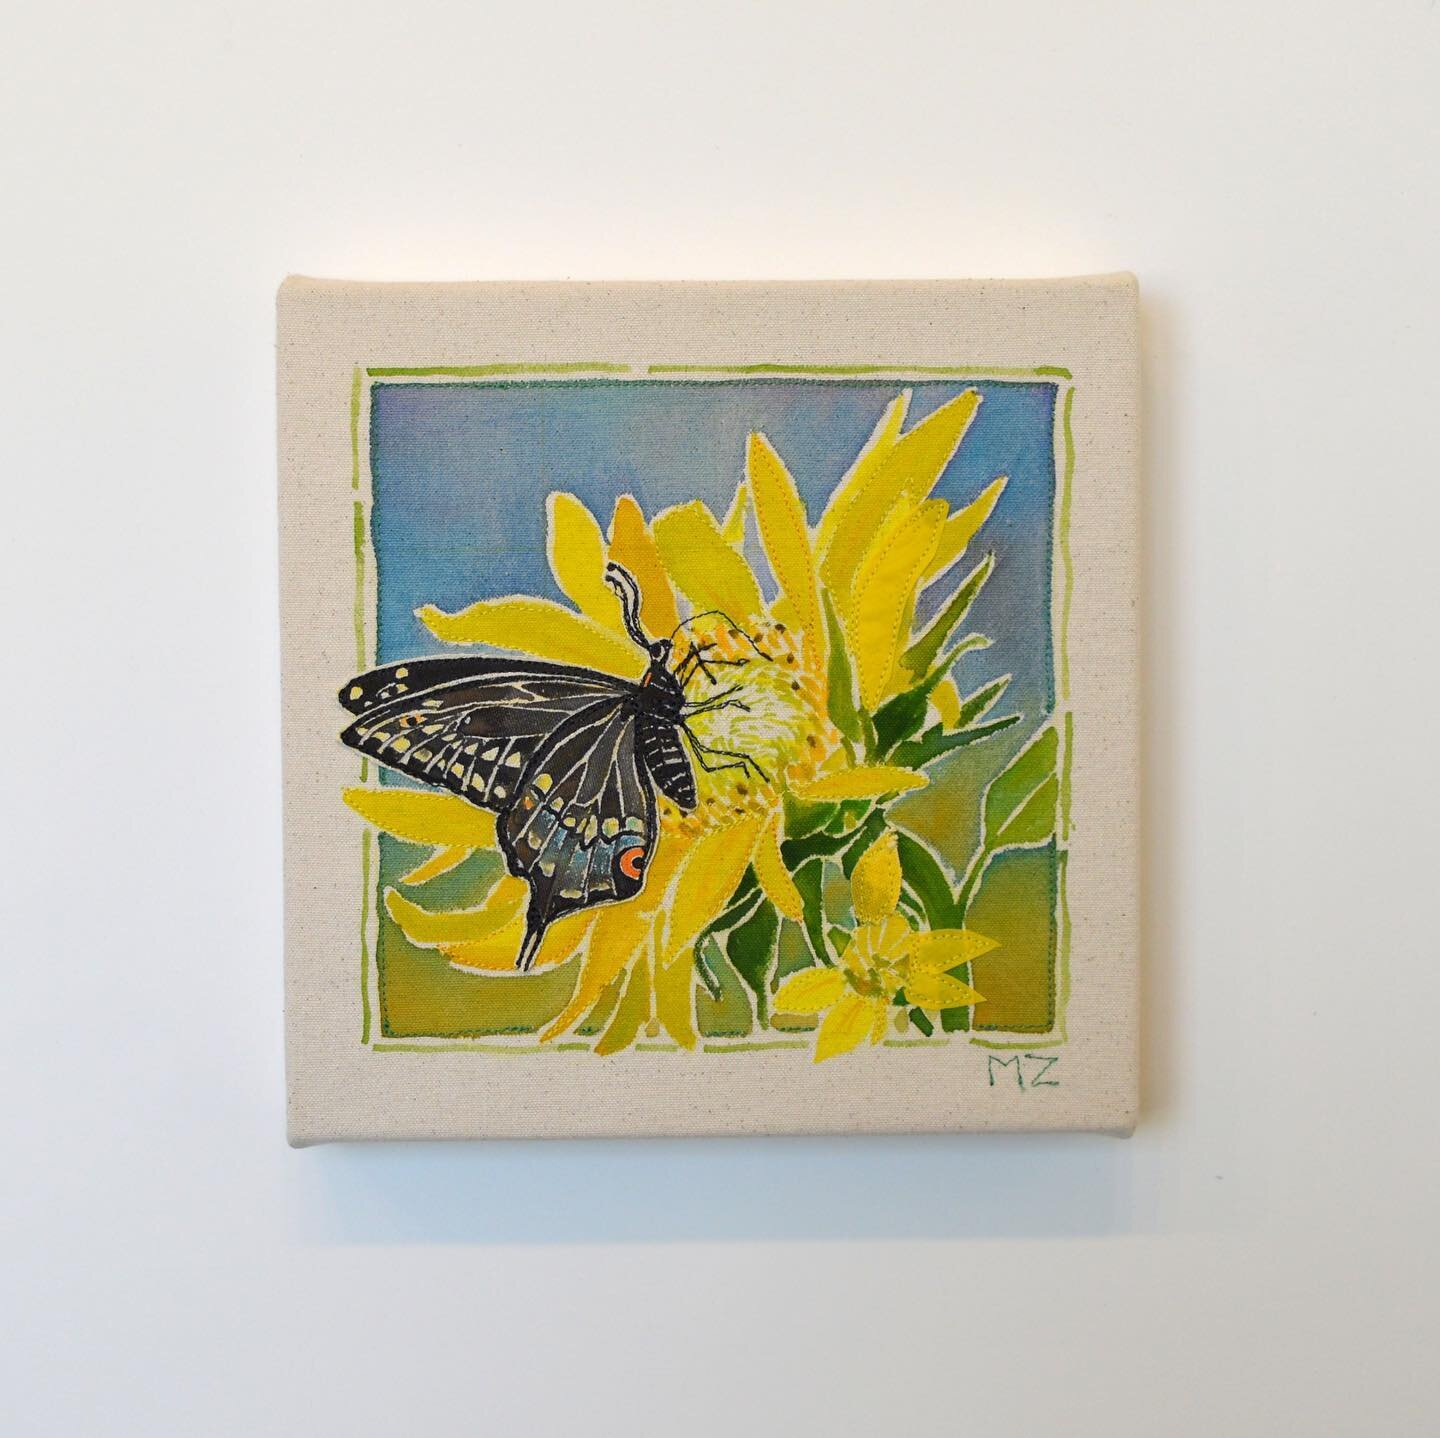 A portion of the sales will benefit the @xercessociety ,&nbsp;which&nbsp;protects the natural world through the conservation of insects and their habitats.

Reception: Friday, May 19th, 4-7pm, 2023
*a family friendly event
@howyoureside in Santa Fe, 